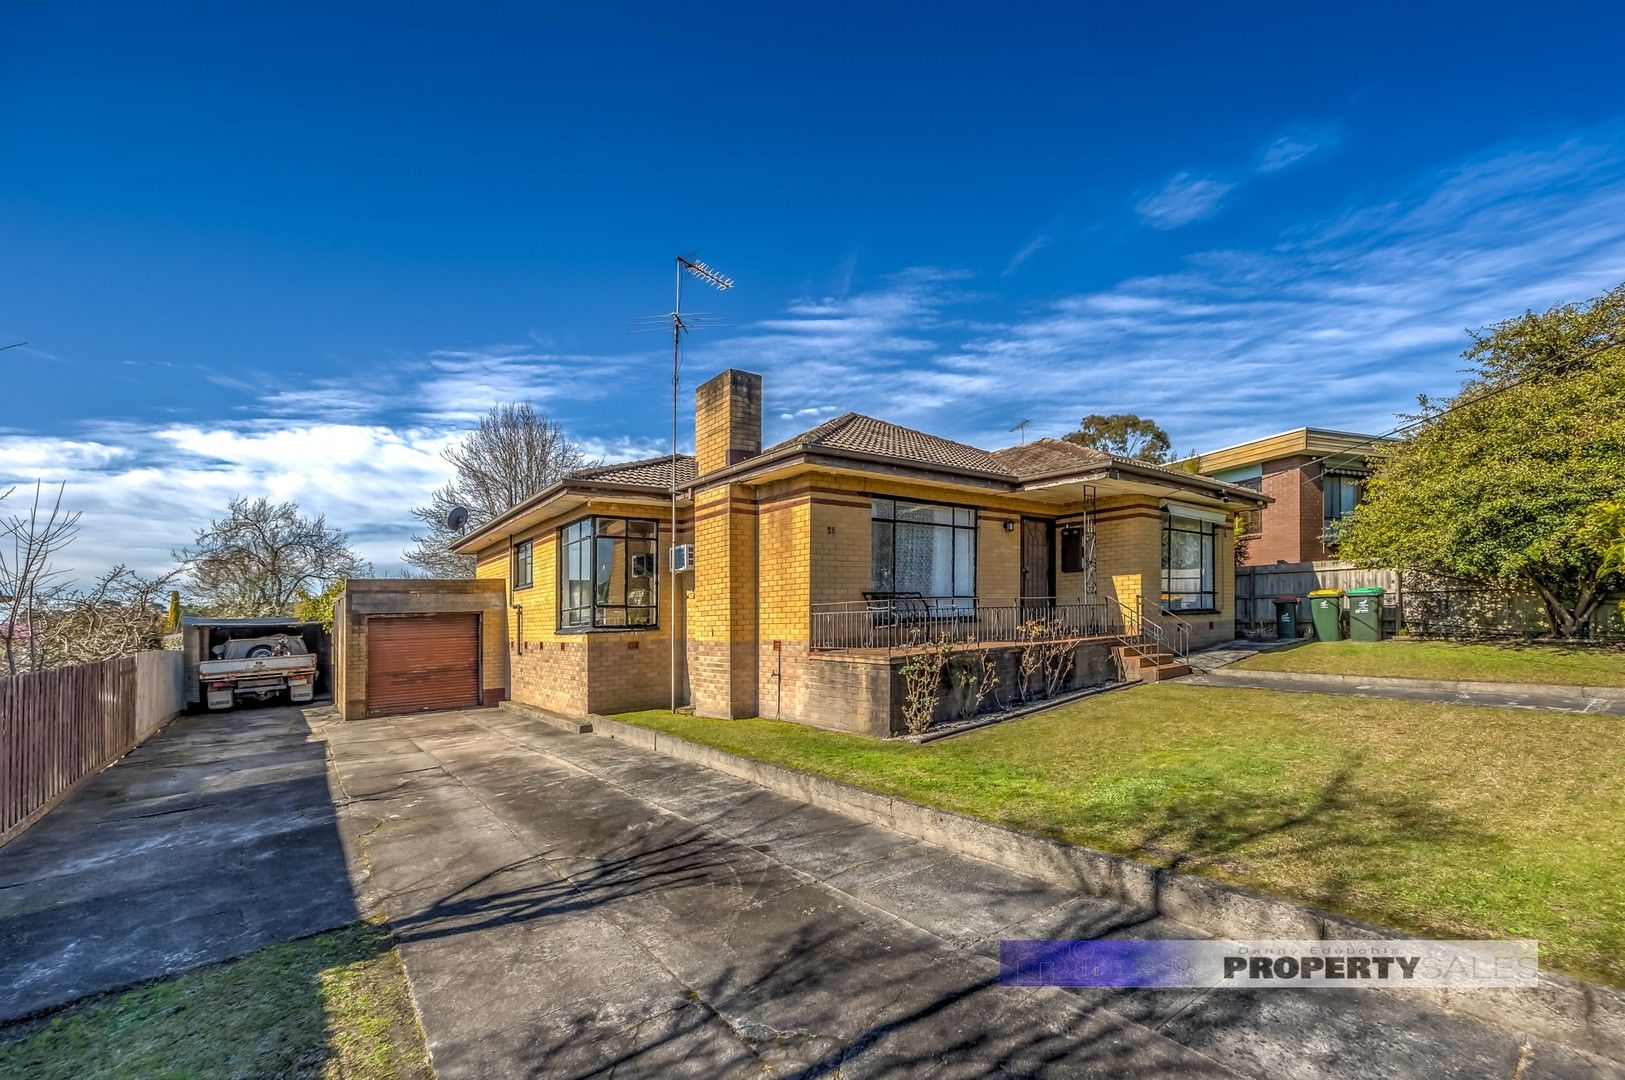 3 bedrooms House in 28 Leith Street NEWBOROUGH VIC, 3825